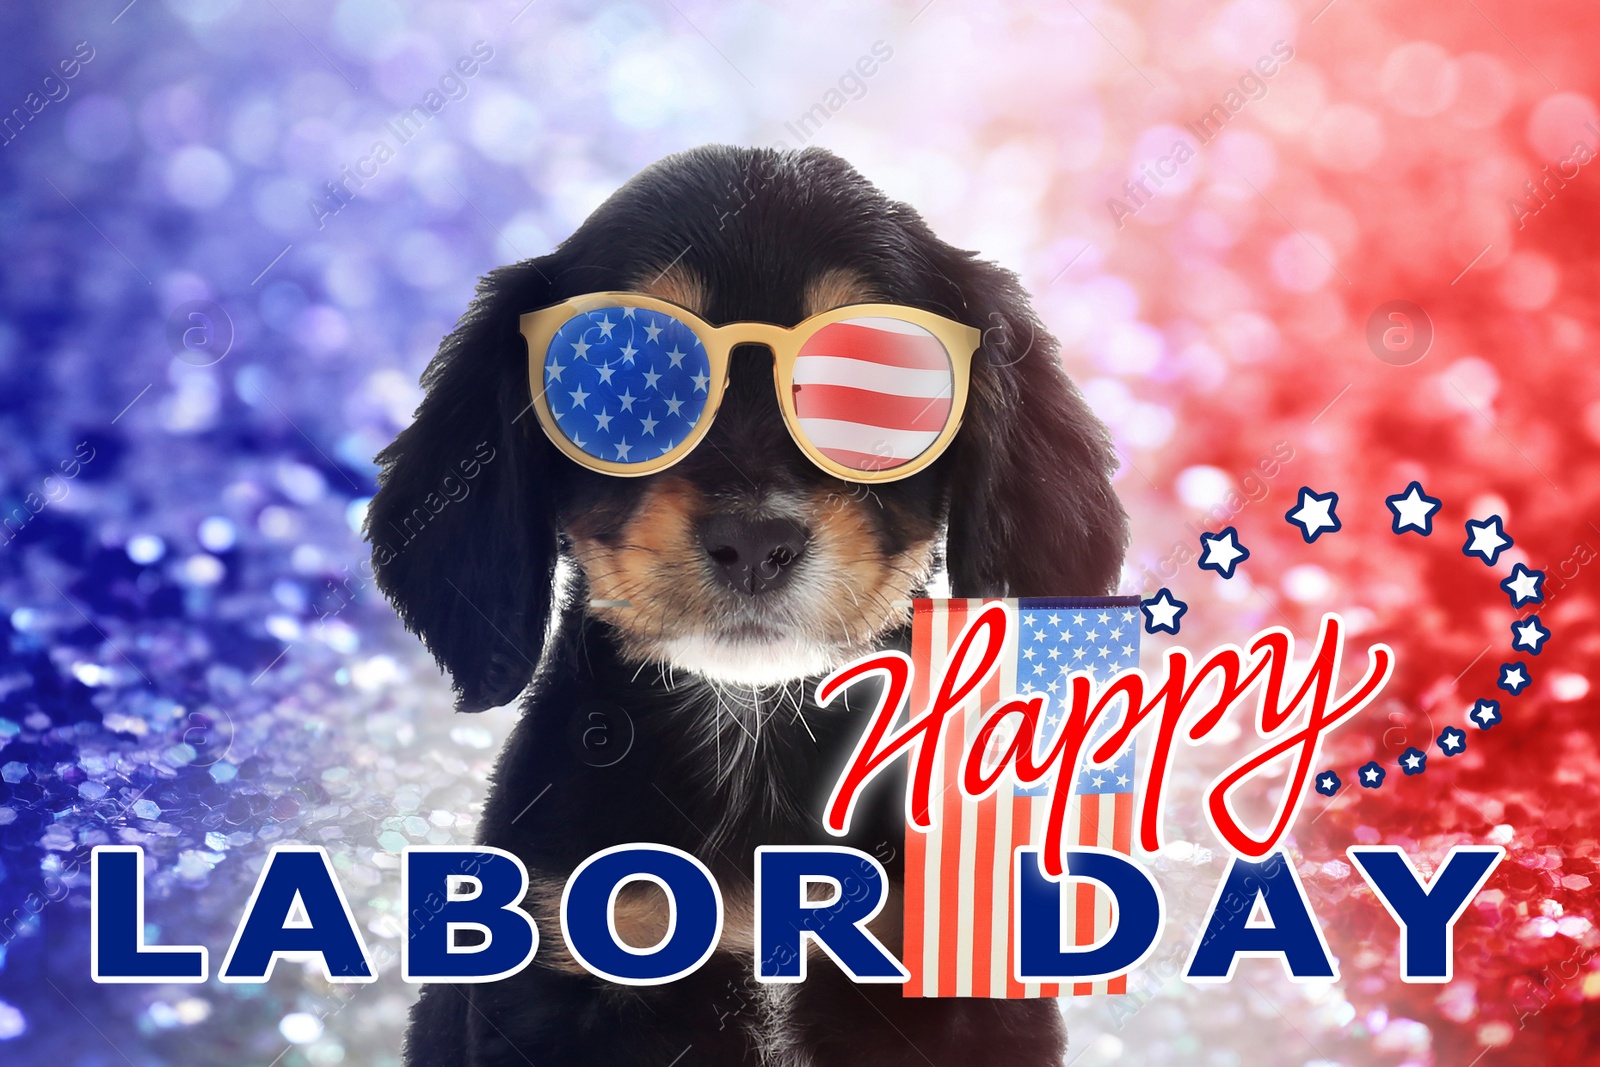 Image of Happy Labor Day. Cute dog with sunglasses and American flag on shiny festive background